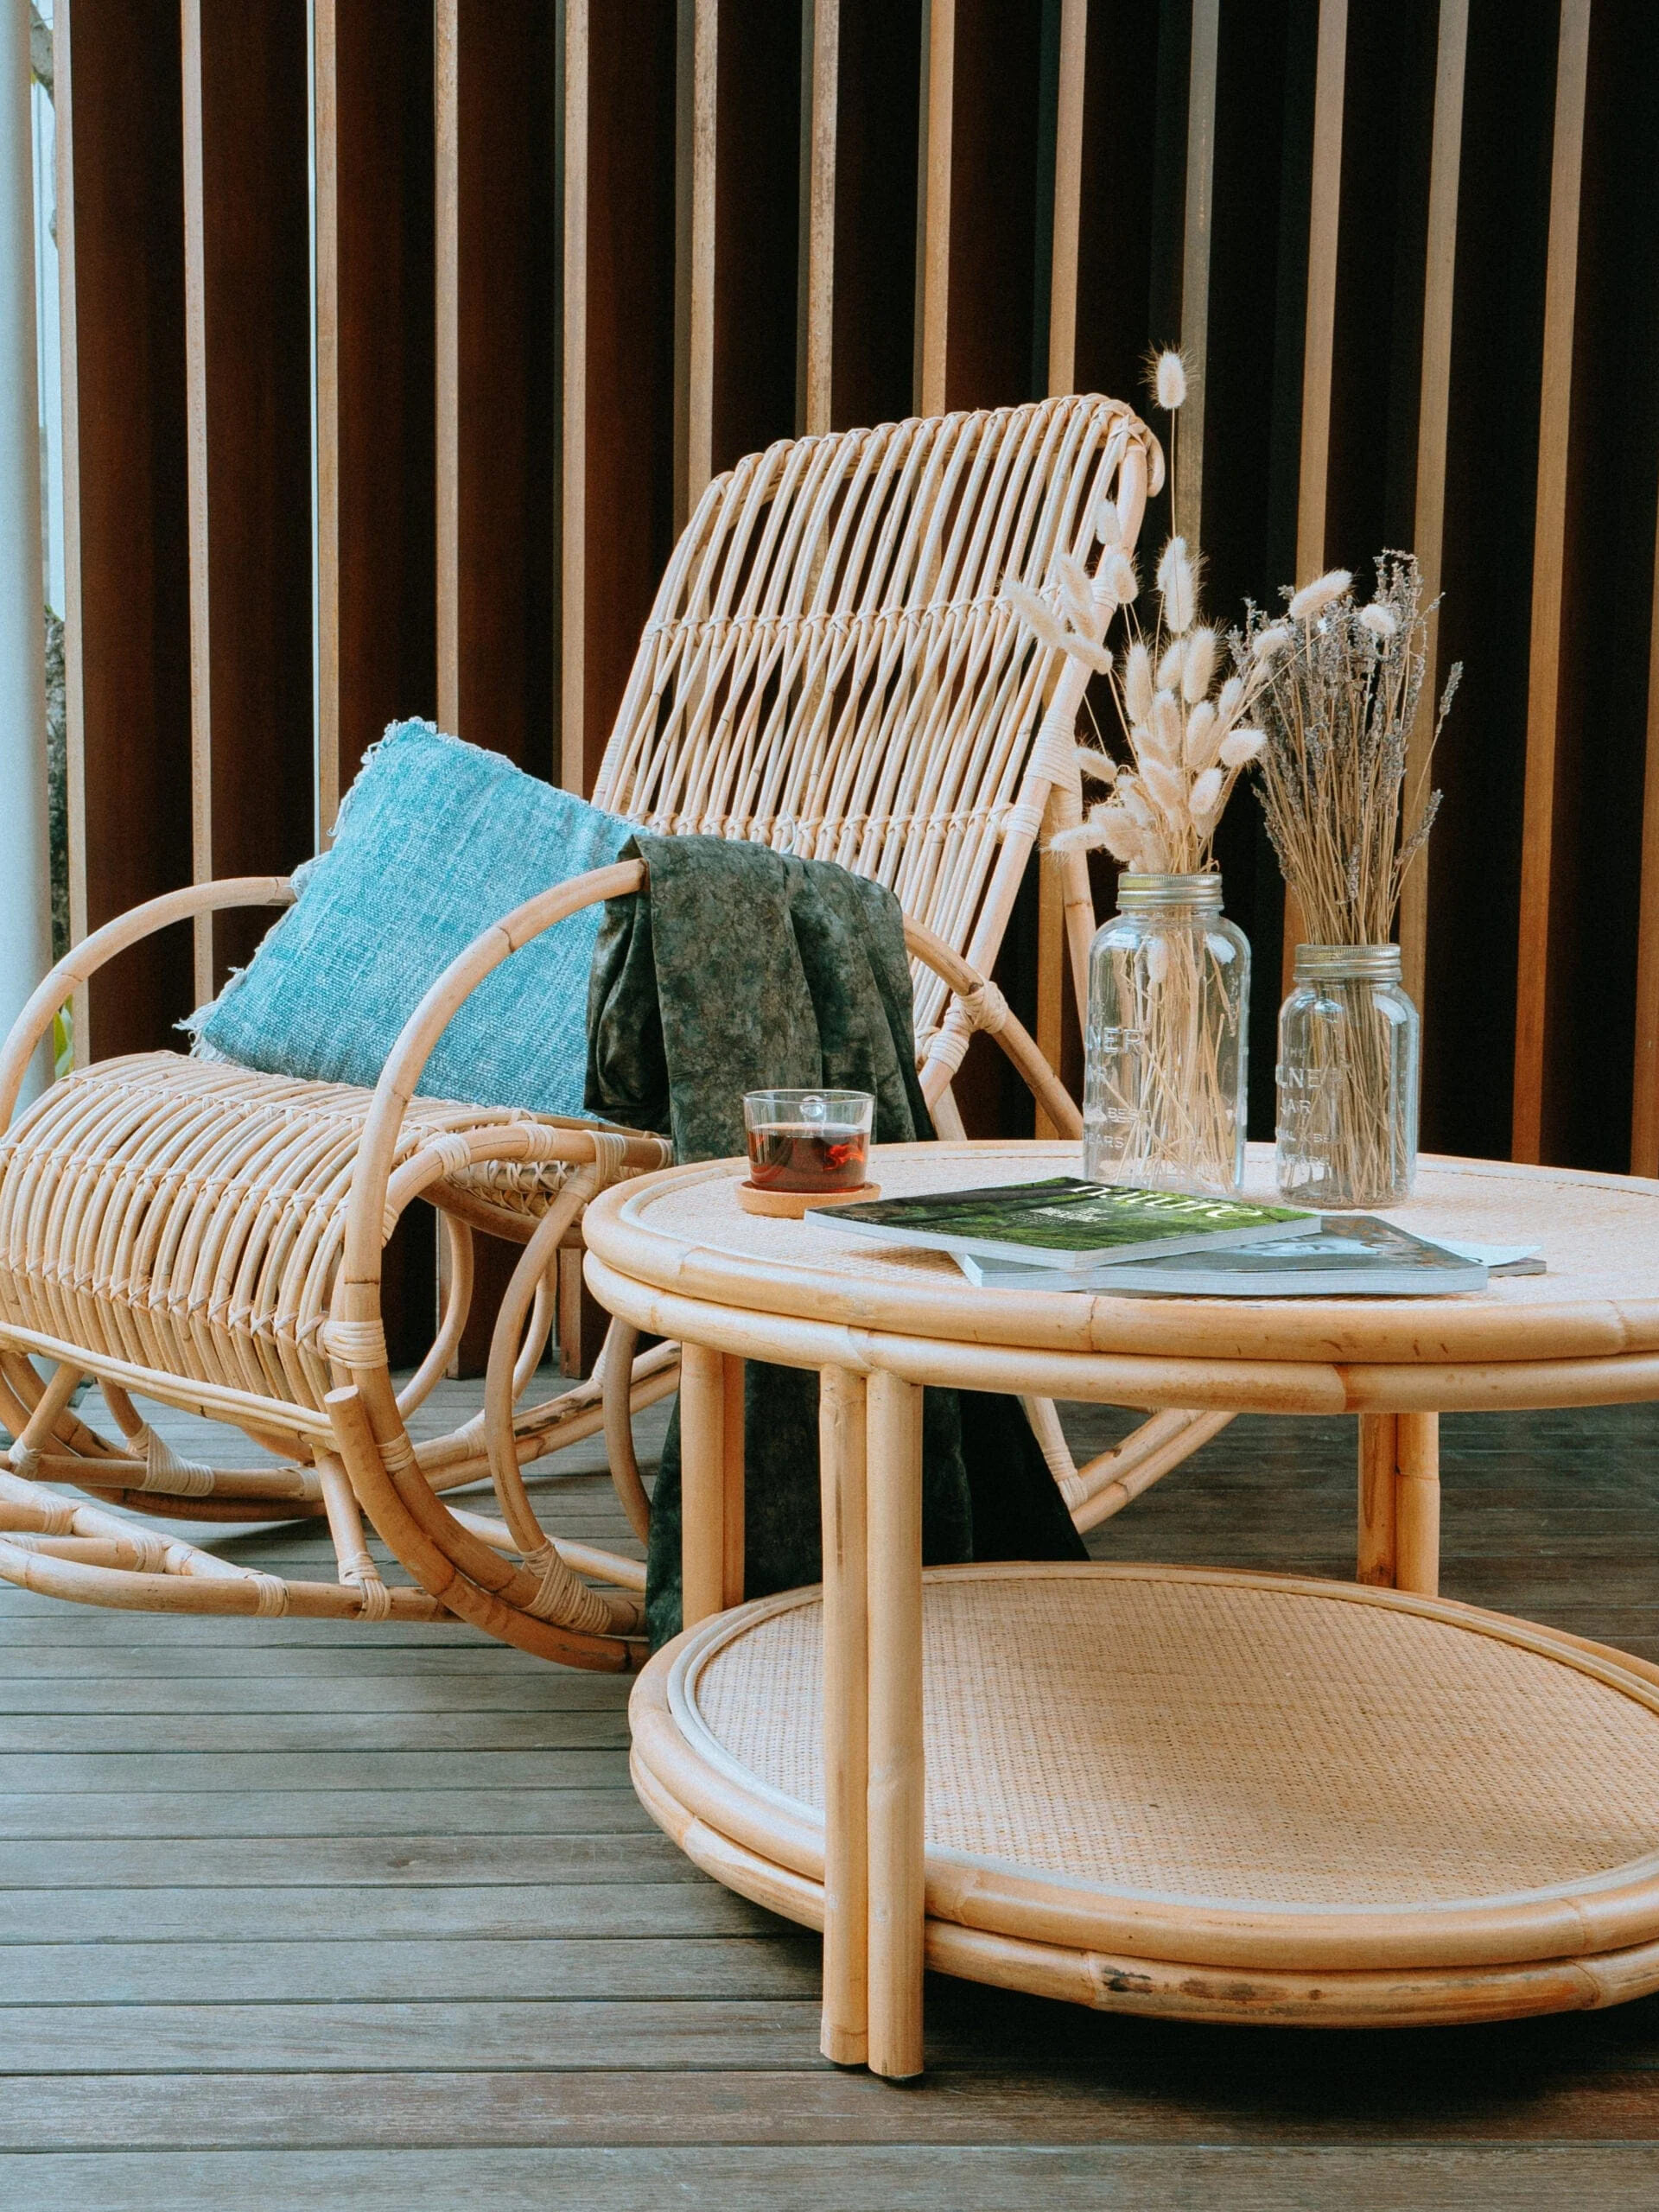 A rattan rocking chair and table on a wooden deck.